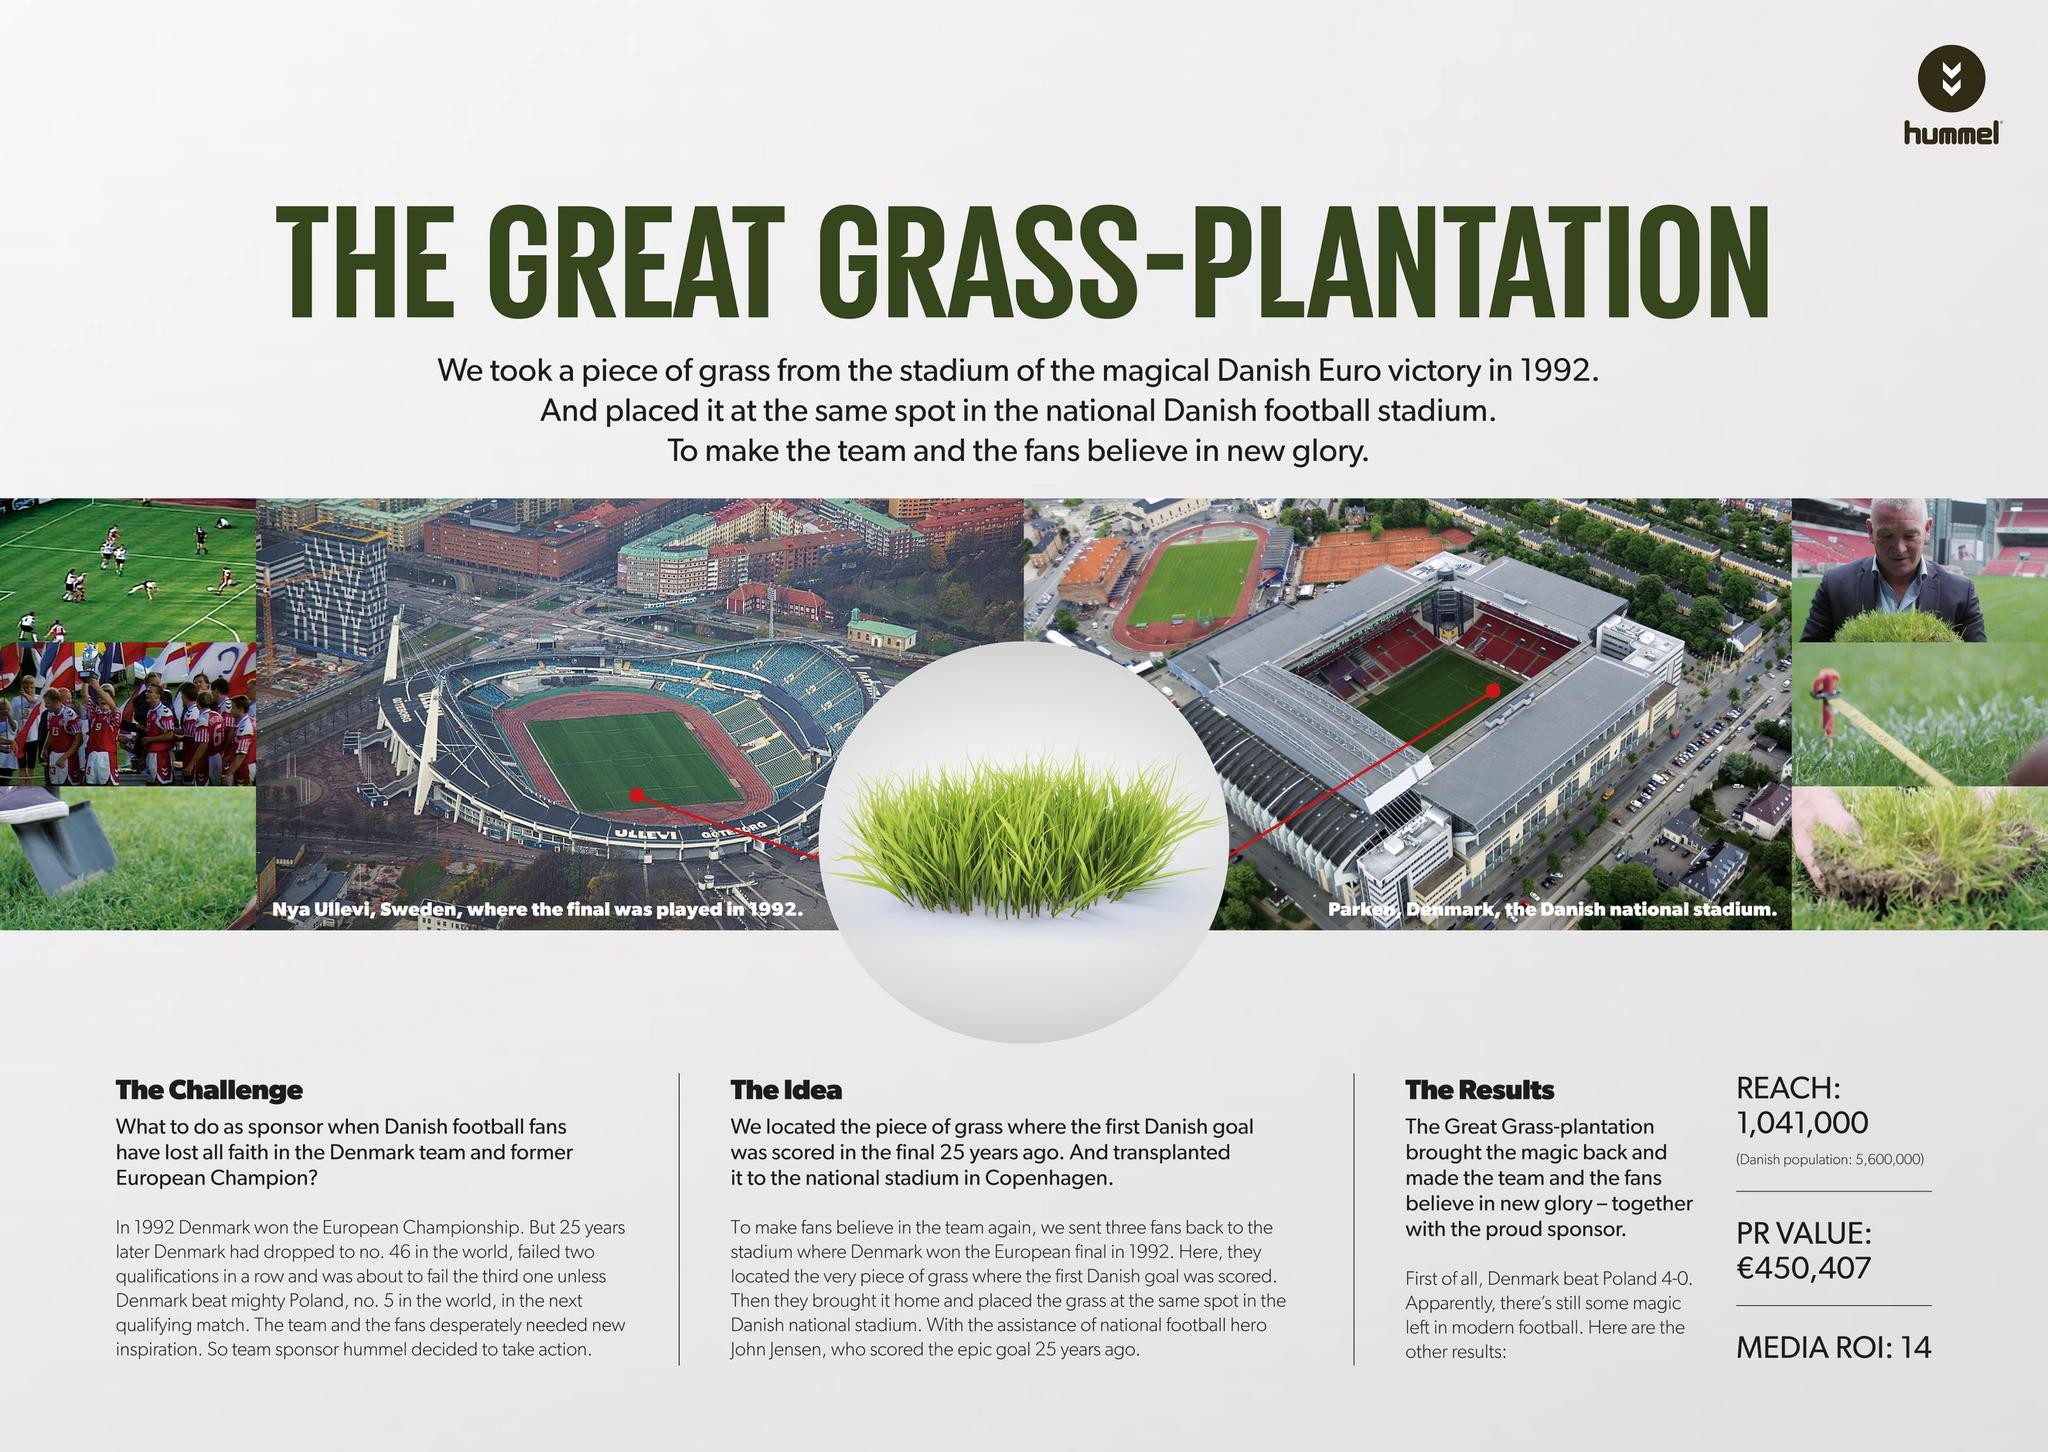 The Great Grass-plantation